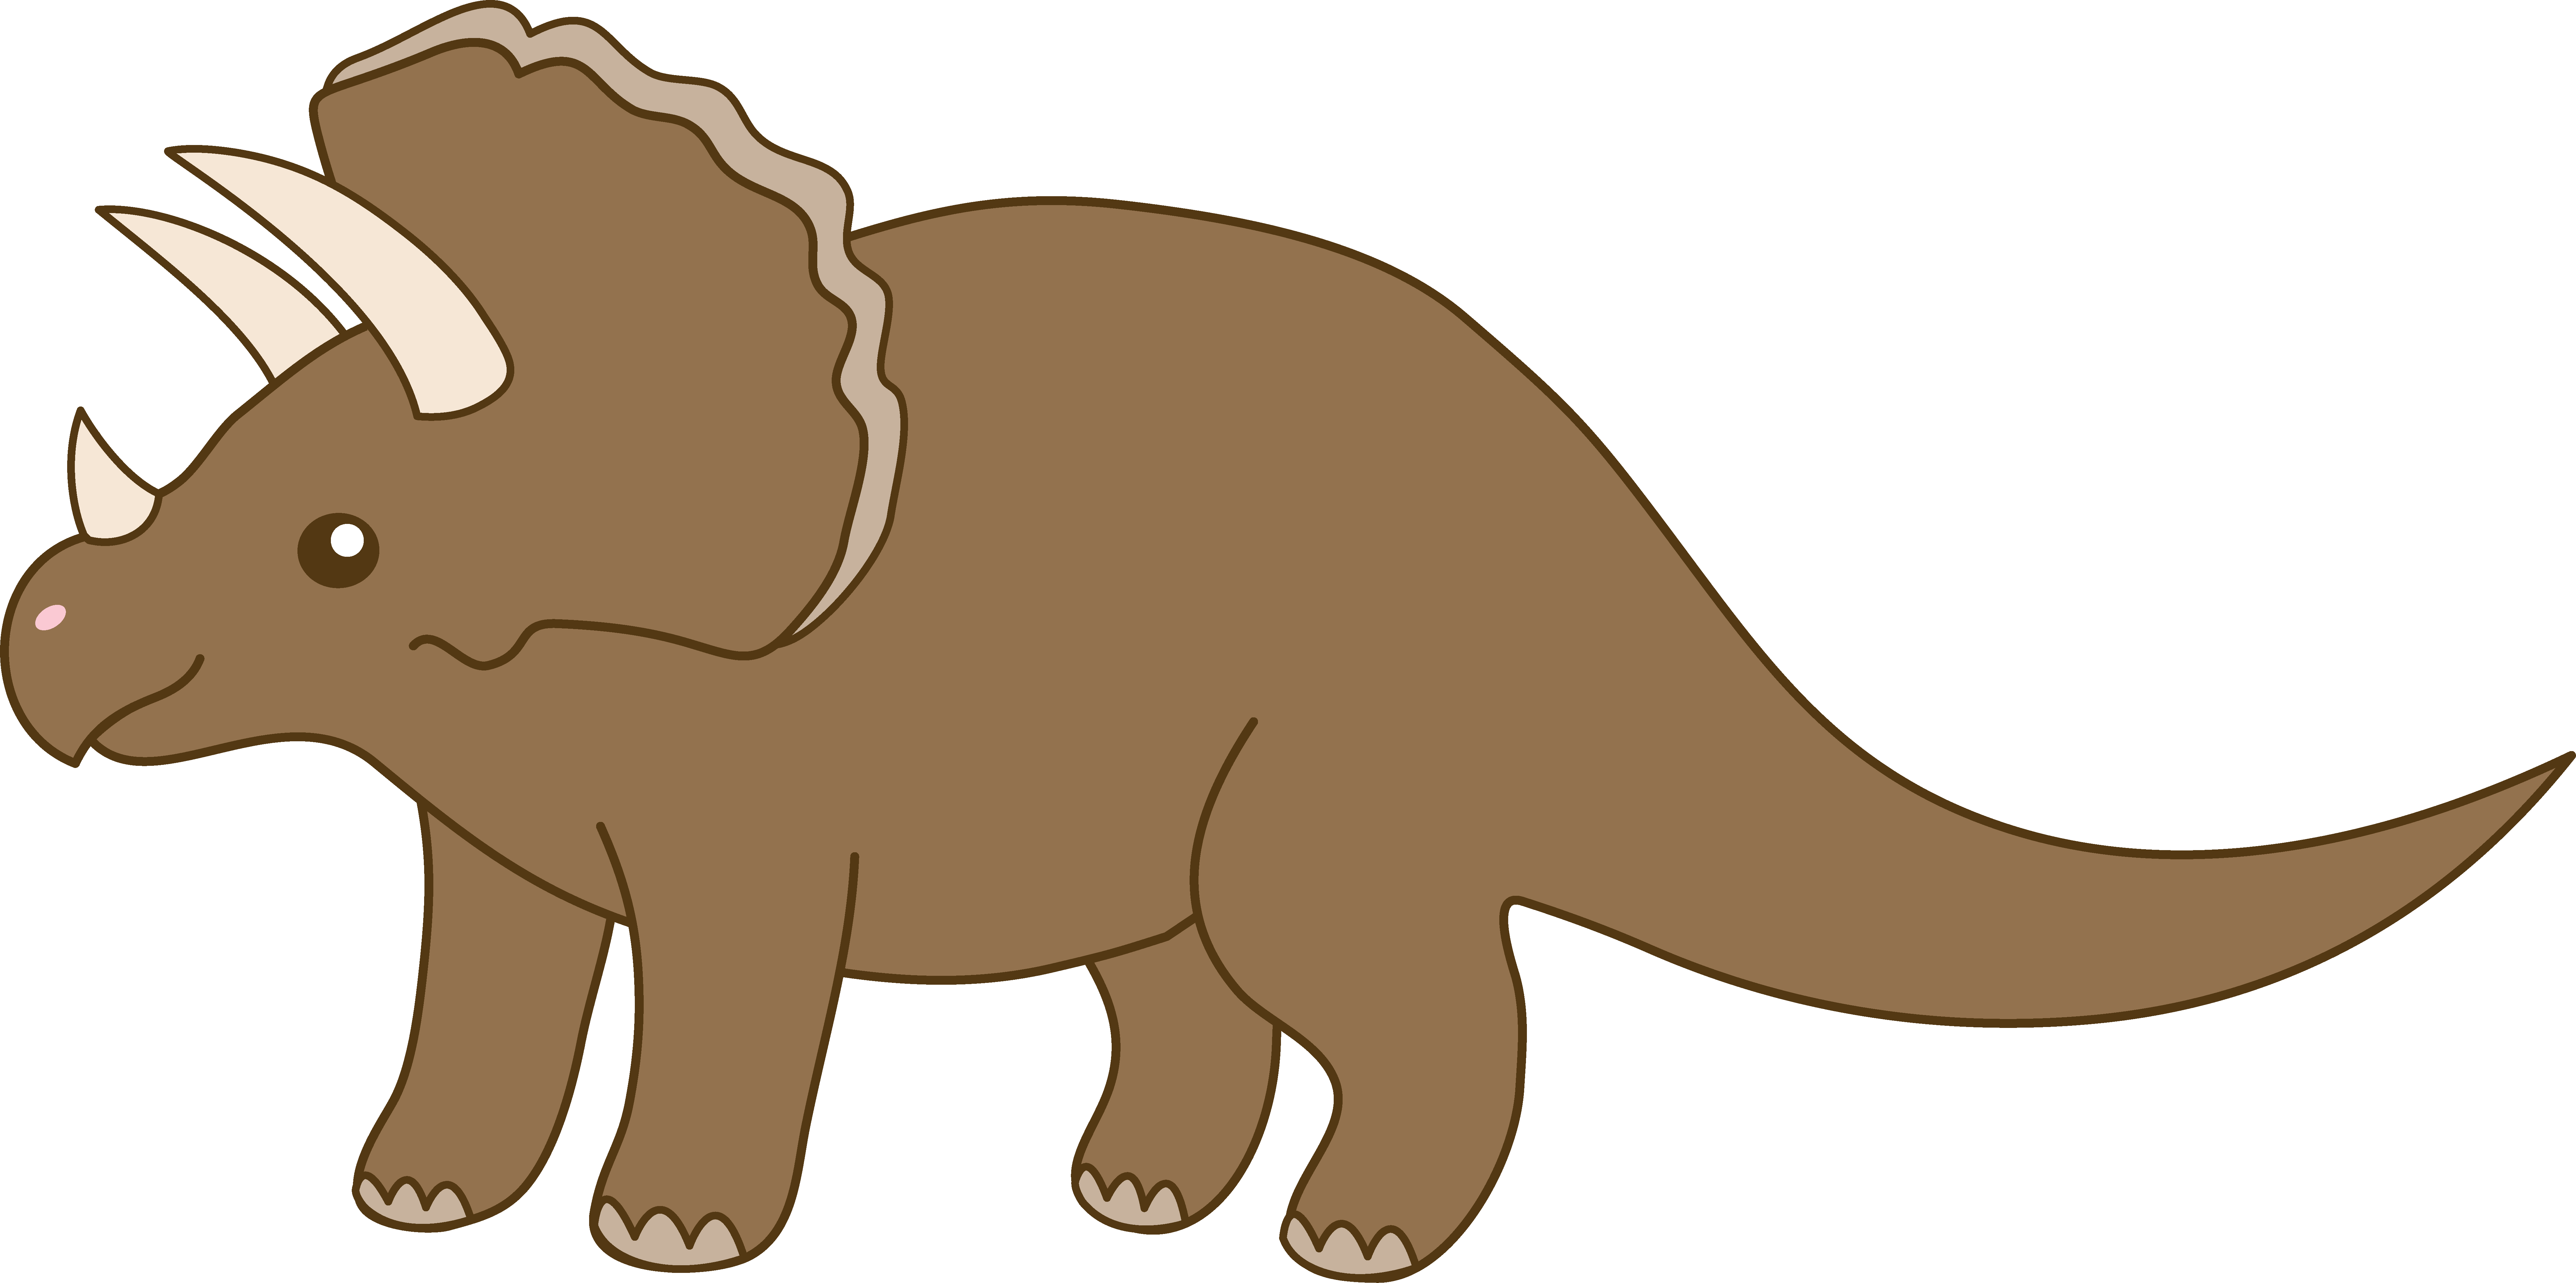 Dinosaur clip art free for kids free clipart images.